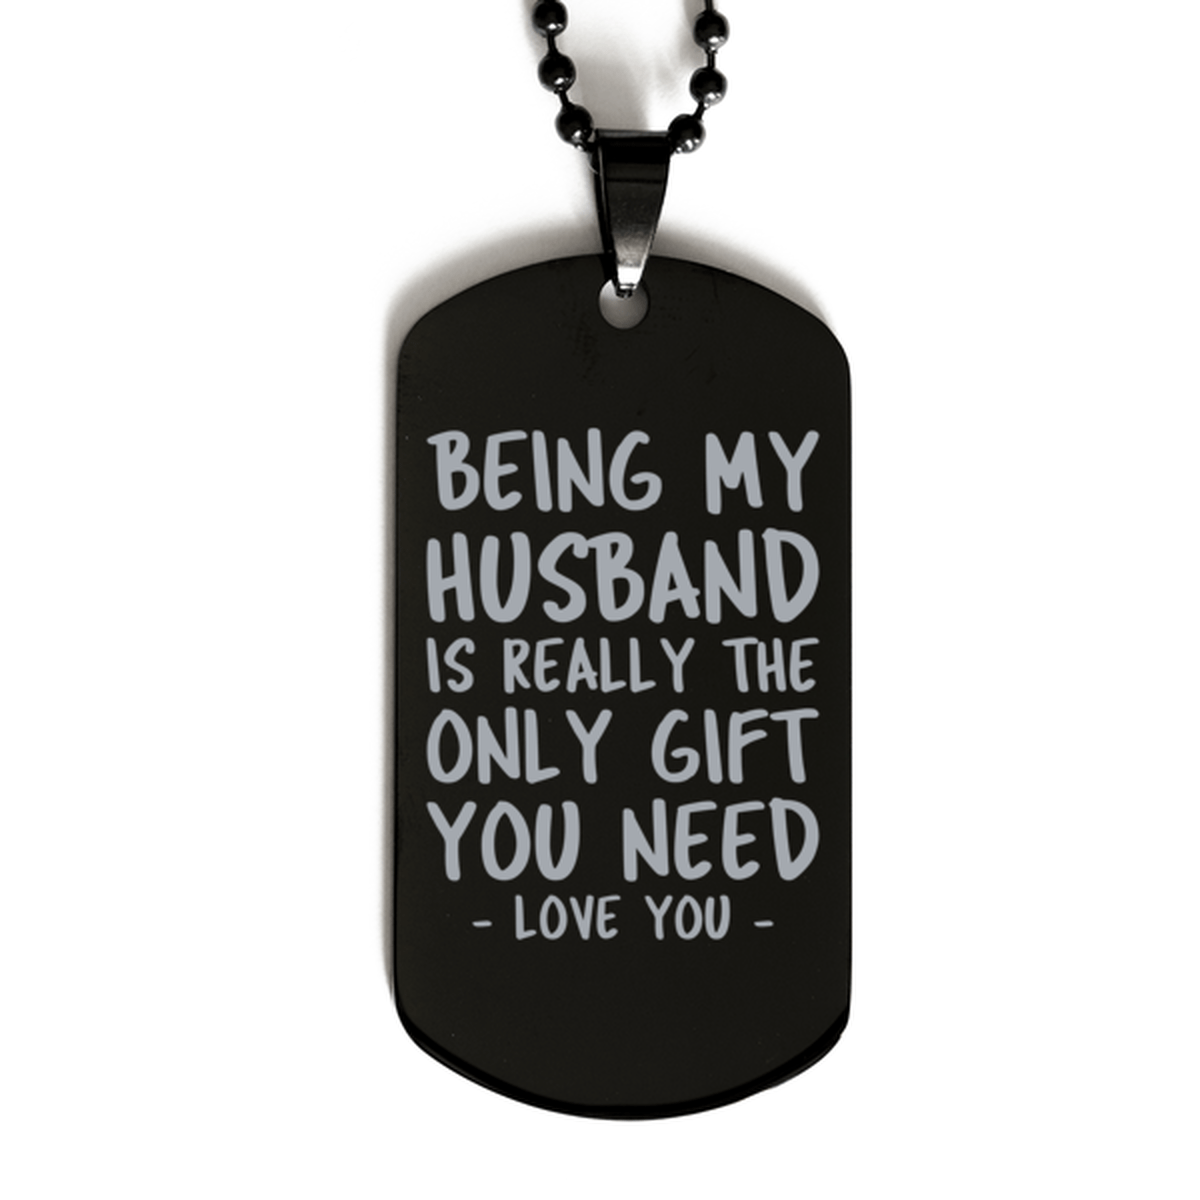 Funny Husband Black Dog Tag Necklace, Being My Husband Is Really the Only Gift You Need, Best Birthday Gifts for Husband